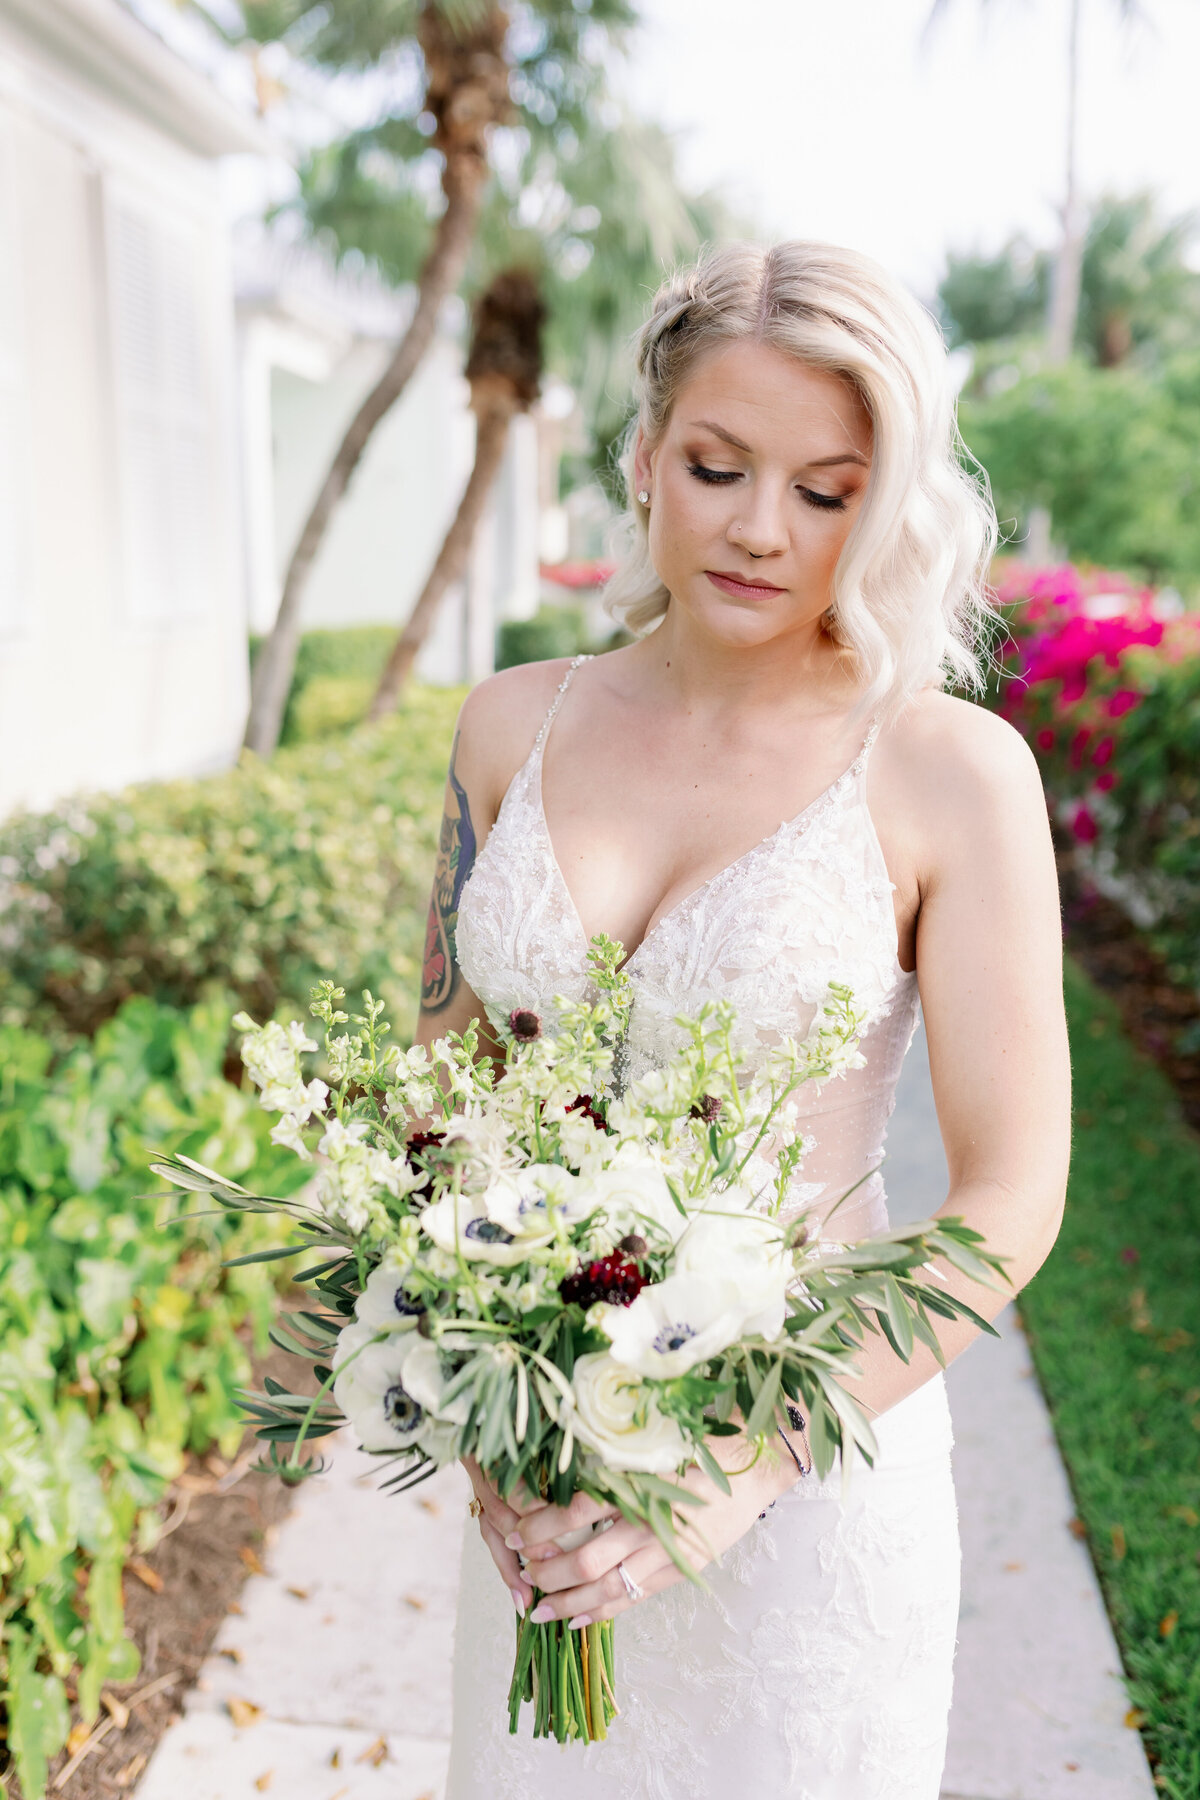 Our Key West bridal hair stylist can create a custom wedding hair design that complements your style and personality. Book your bridal hair appointment at Makeup N Giggles.